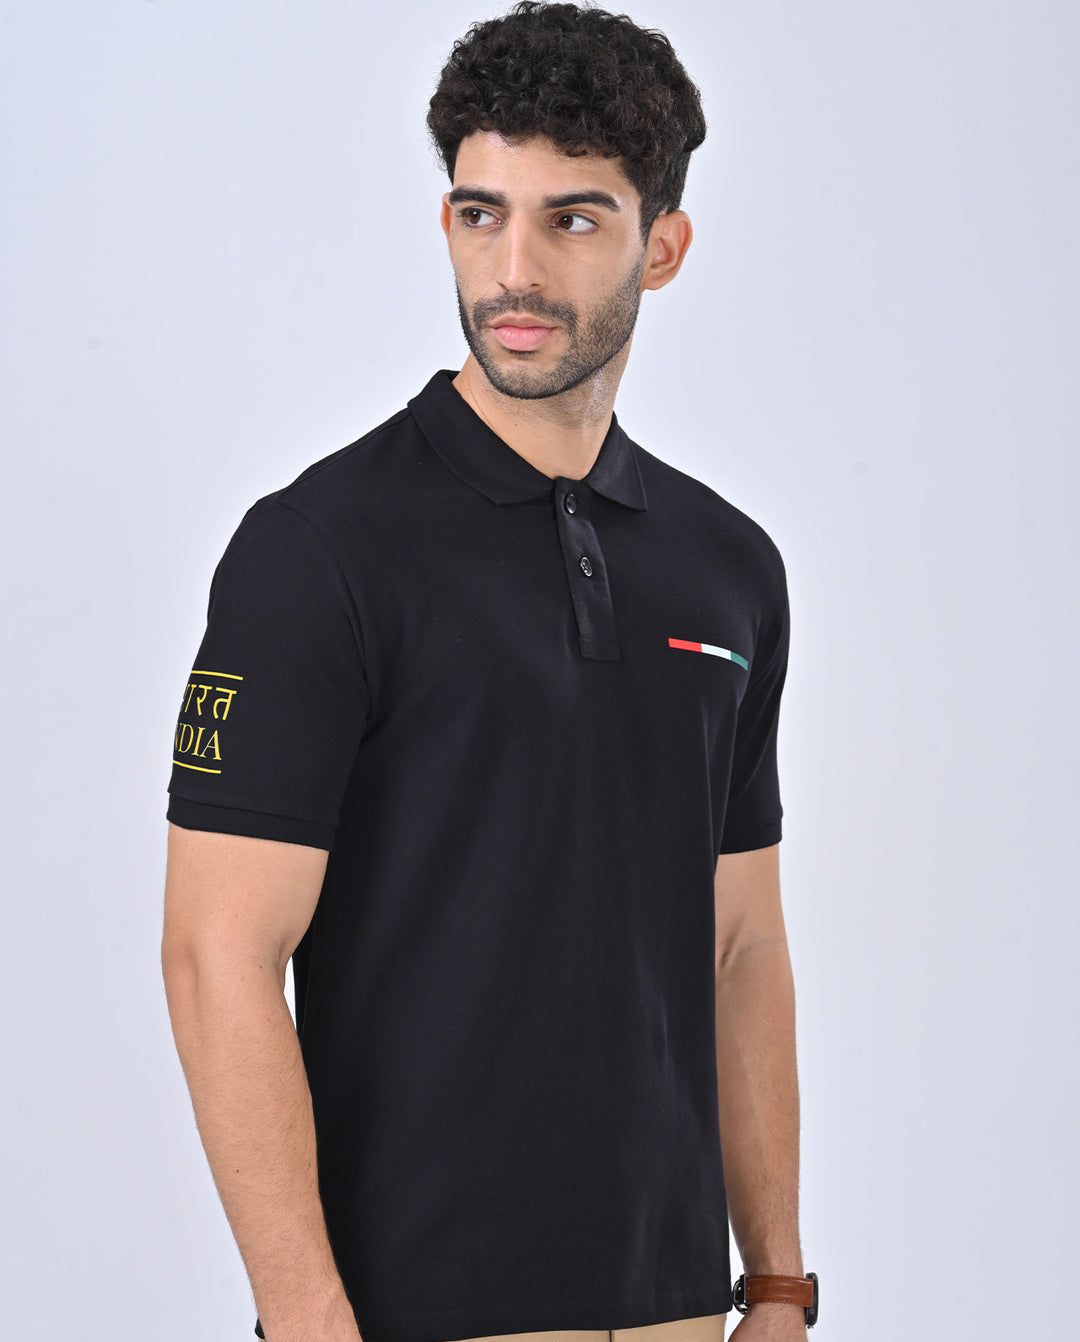 Bharat Mother India Polo T-Shirt